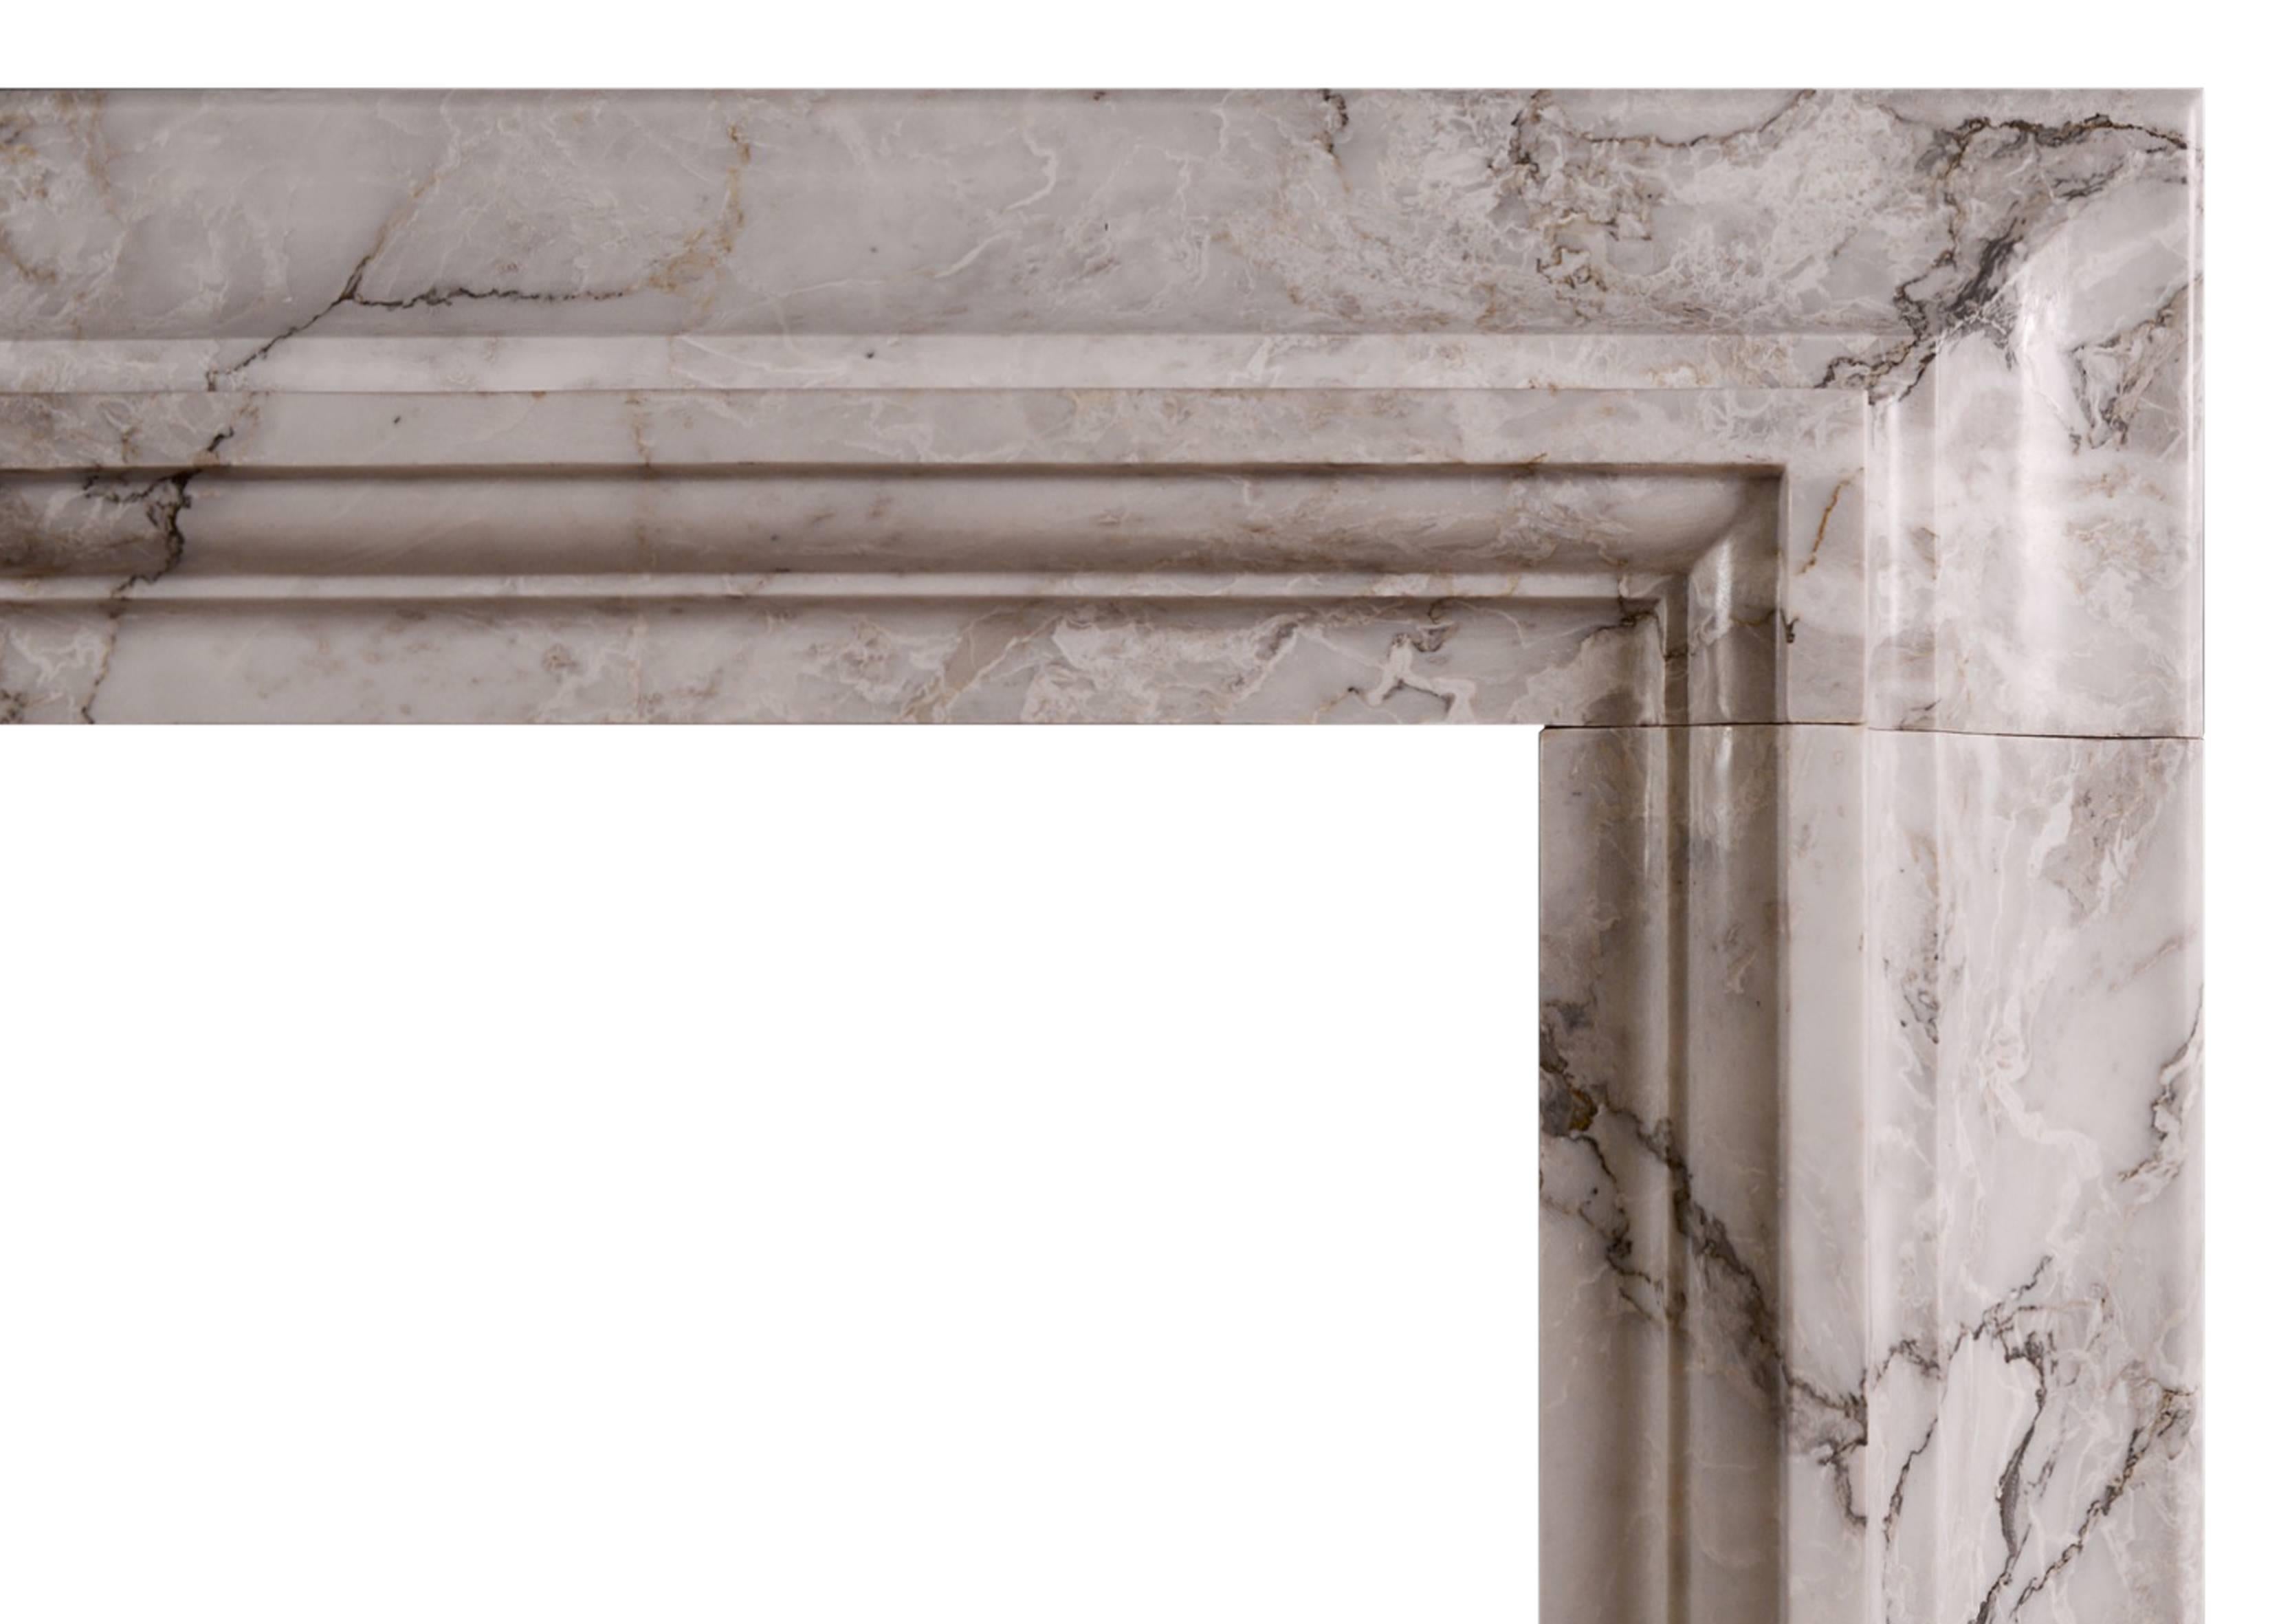 A stylish Italian fireplace in Italian Arabescato marble. Moulded frieze and jambs of architectural form. A copy of an original chimneypiece.

N.B. May be subject to an extended lead time.

Measures:
Shelf width:           15720 mm /   61 3/4